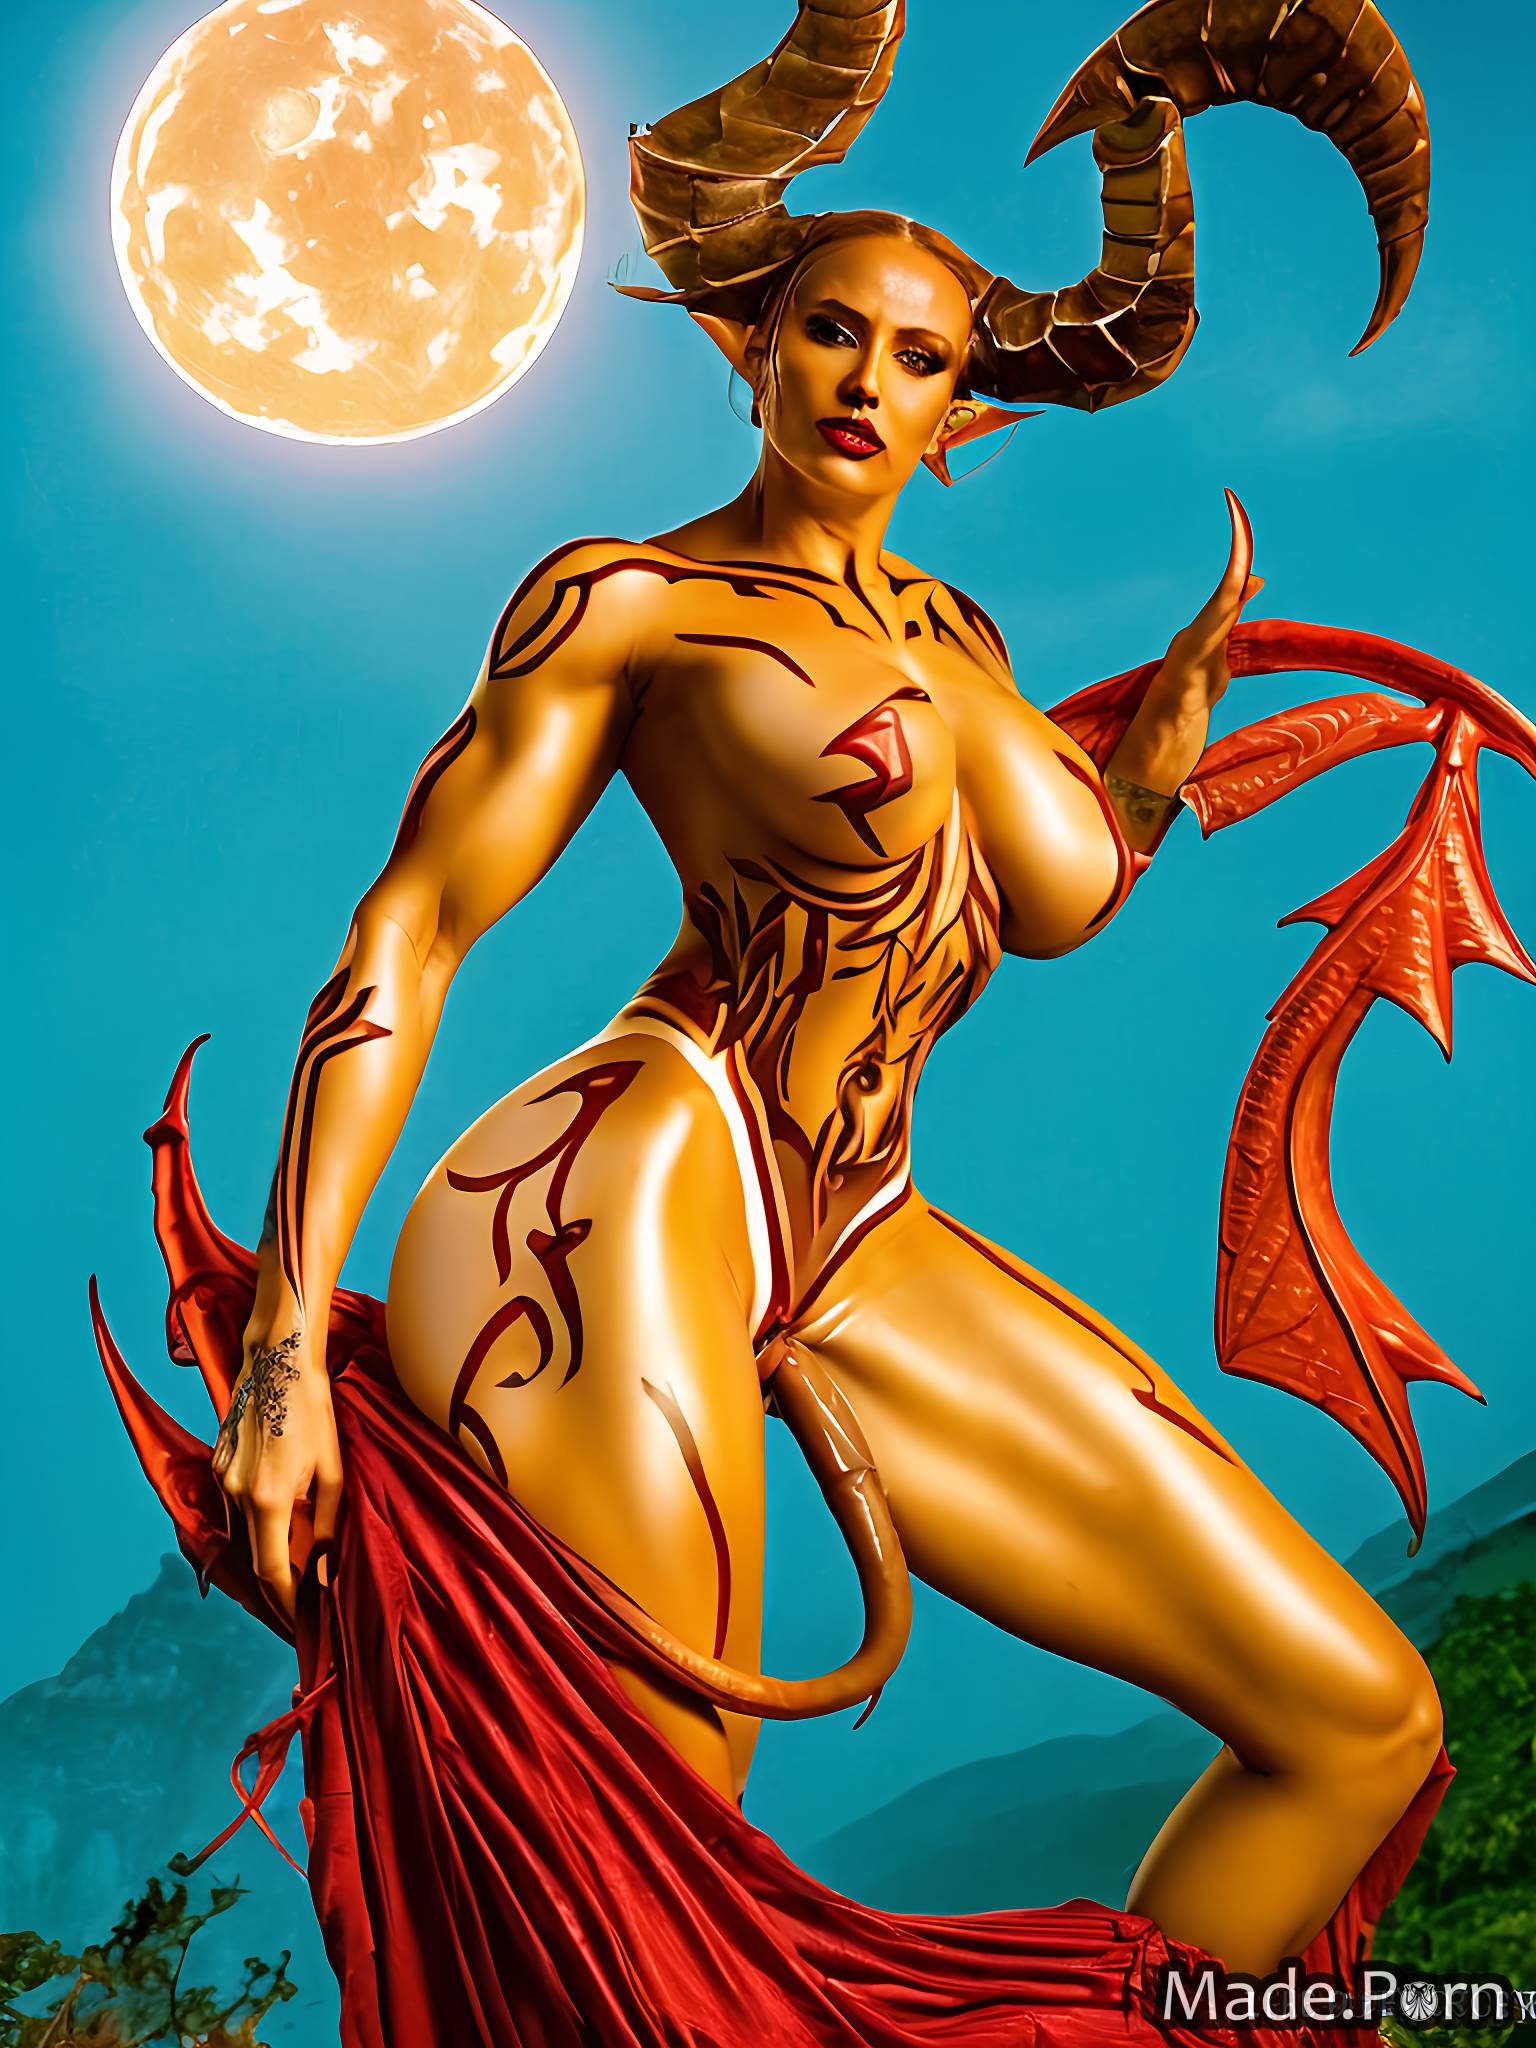 dragon scales woman nude viking devil solar eclipse thighs